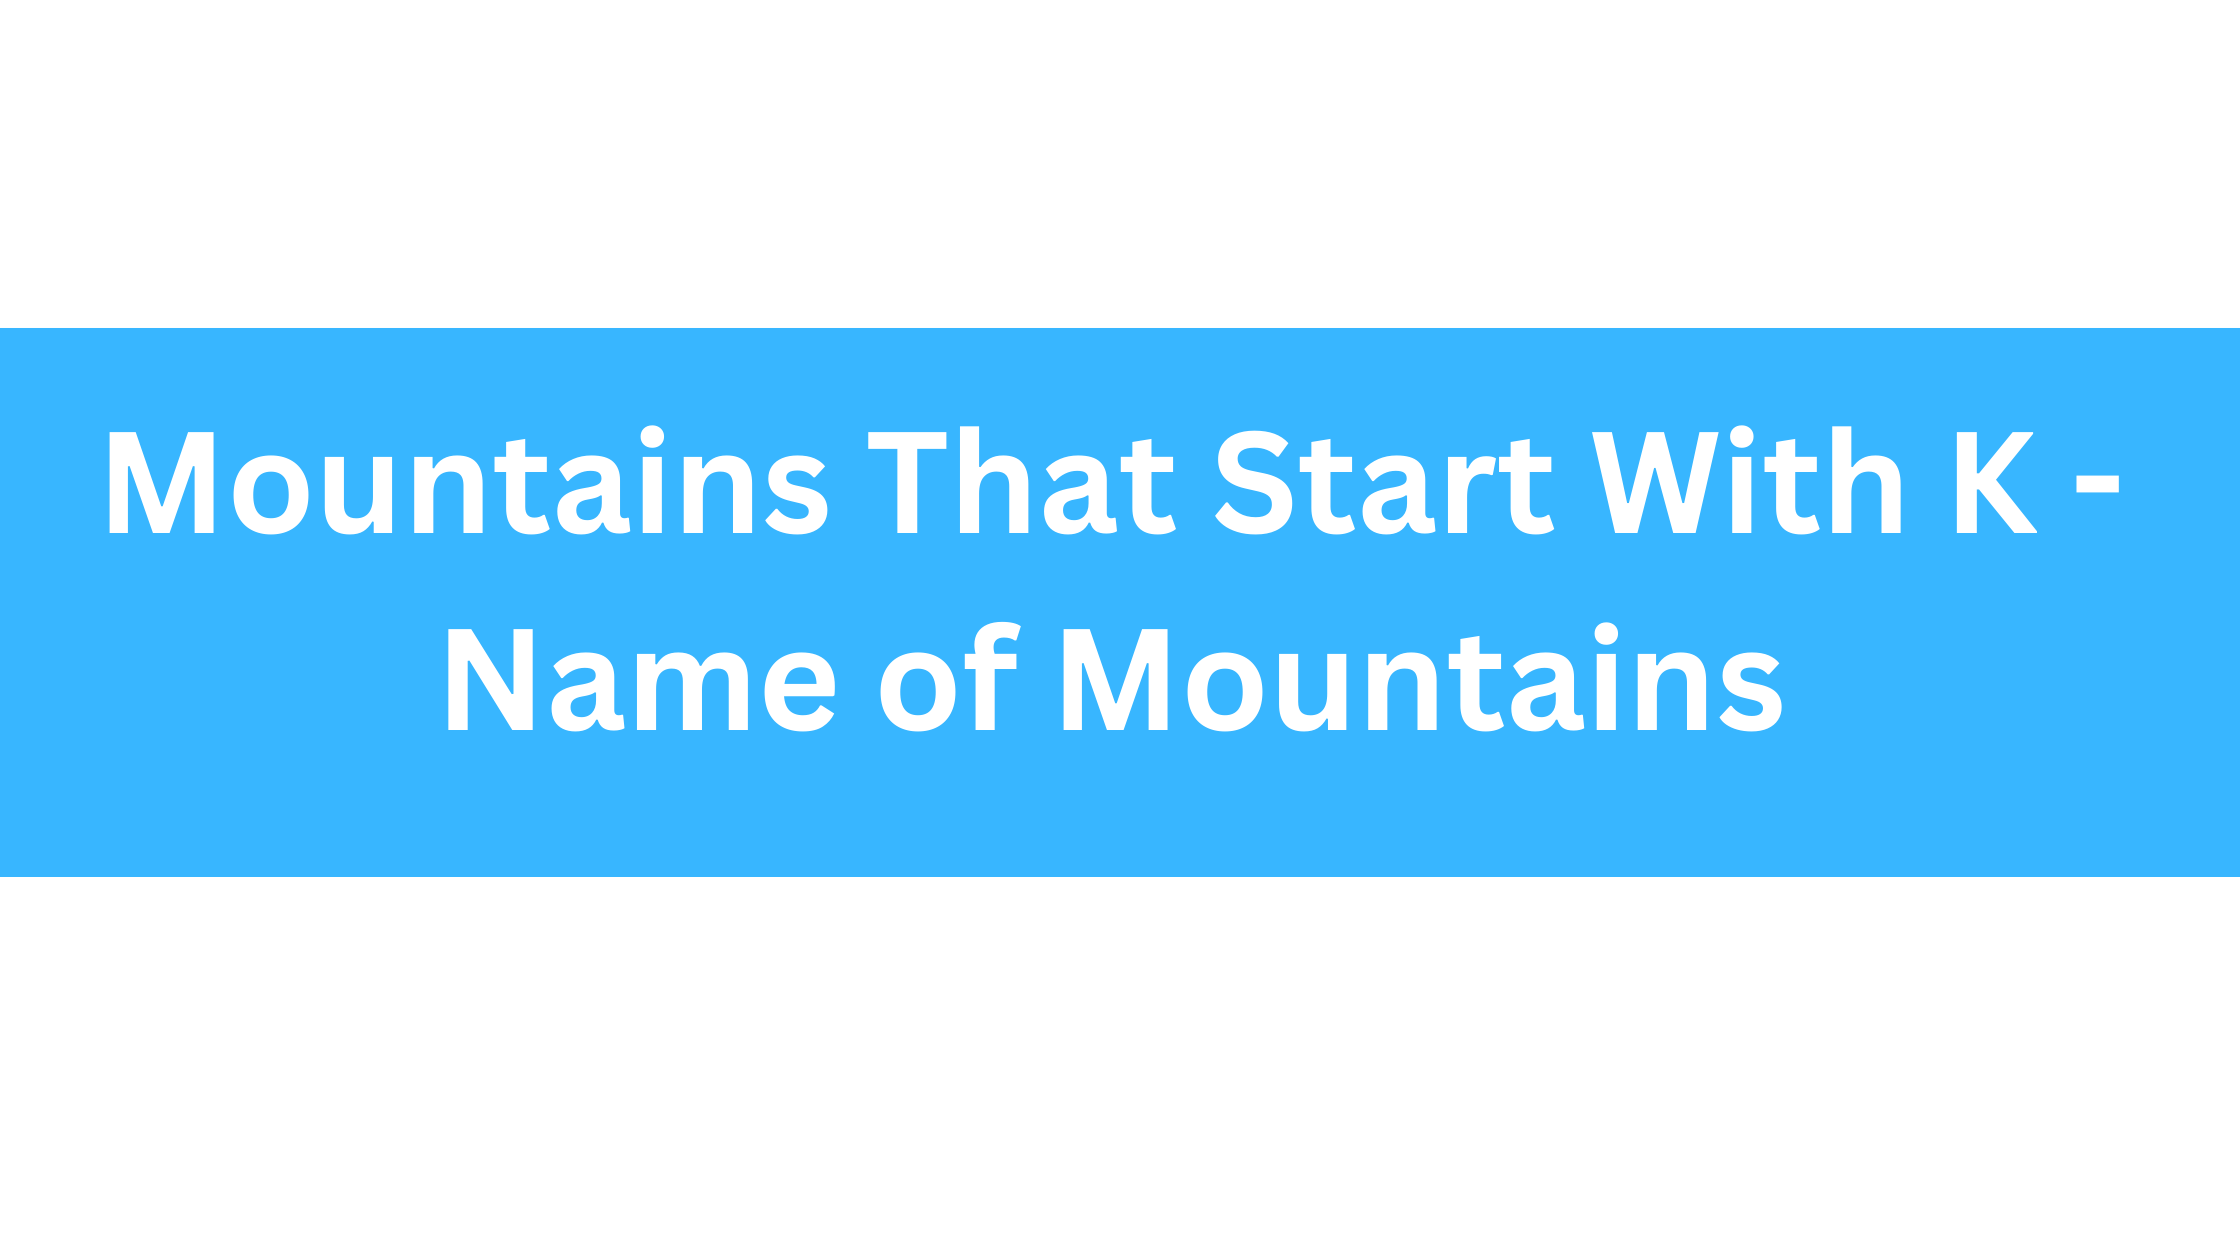 Mountains That Start With K